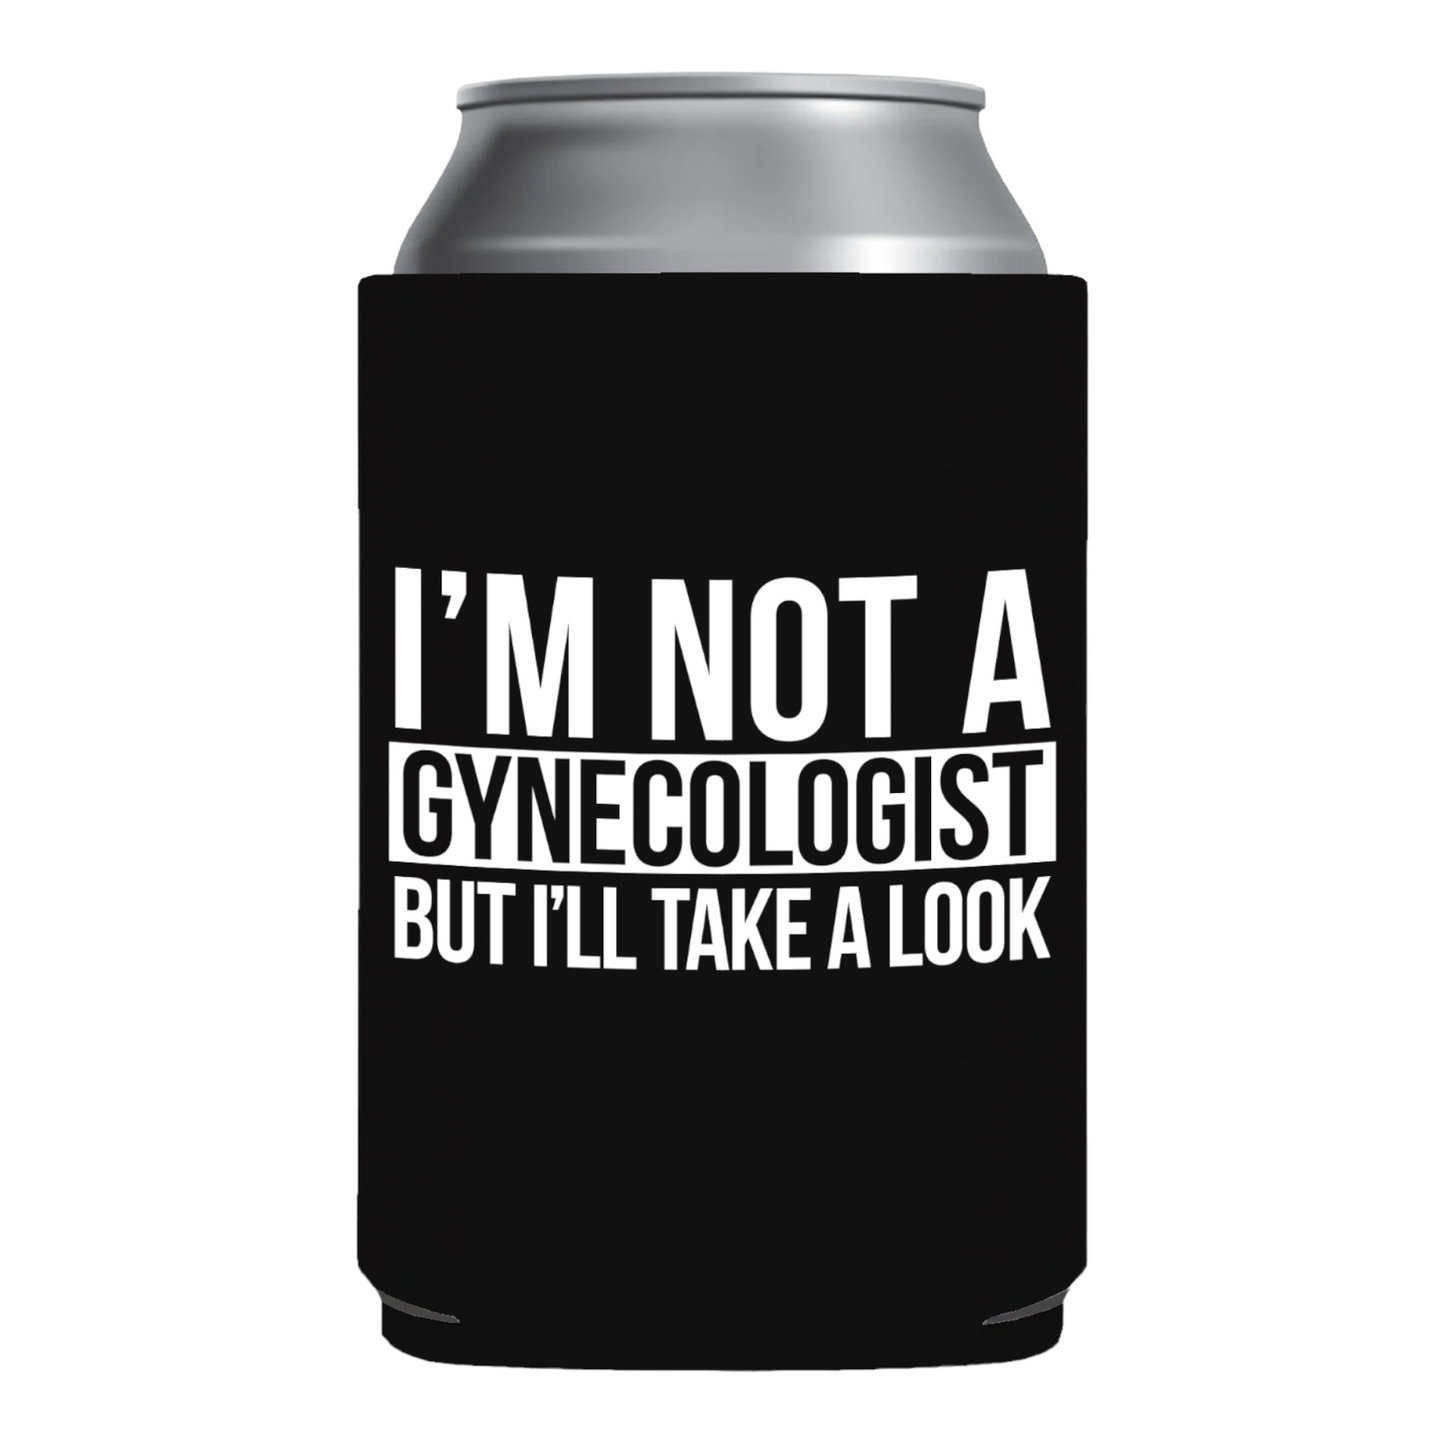 I'm Not A Gynecologist But I'll Take A Look Funny Beer Can Cooler Holder Sleeve